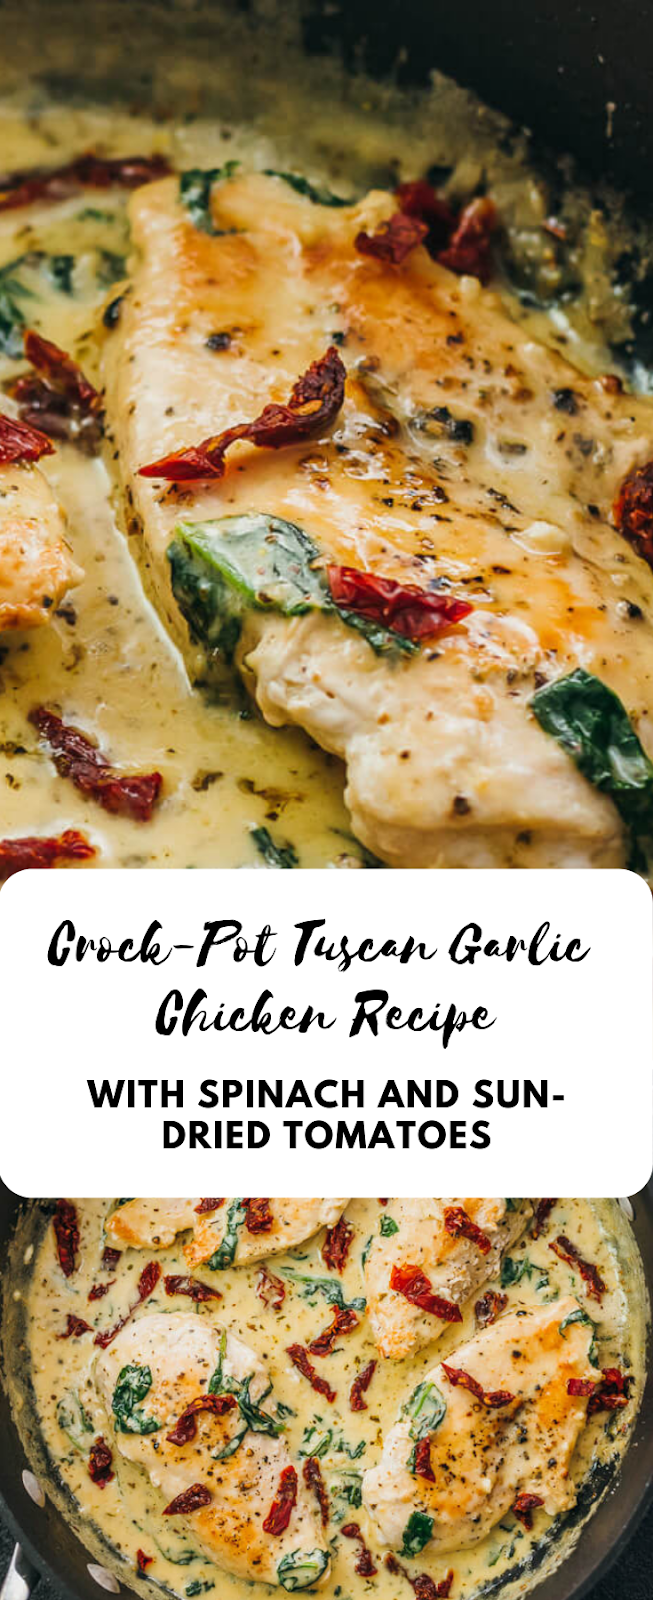 Crock-Pot Tuscan Garlic Chicken Recipe With Spinach and Sun-Dried Tomatoes